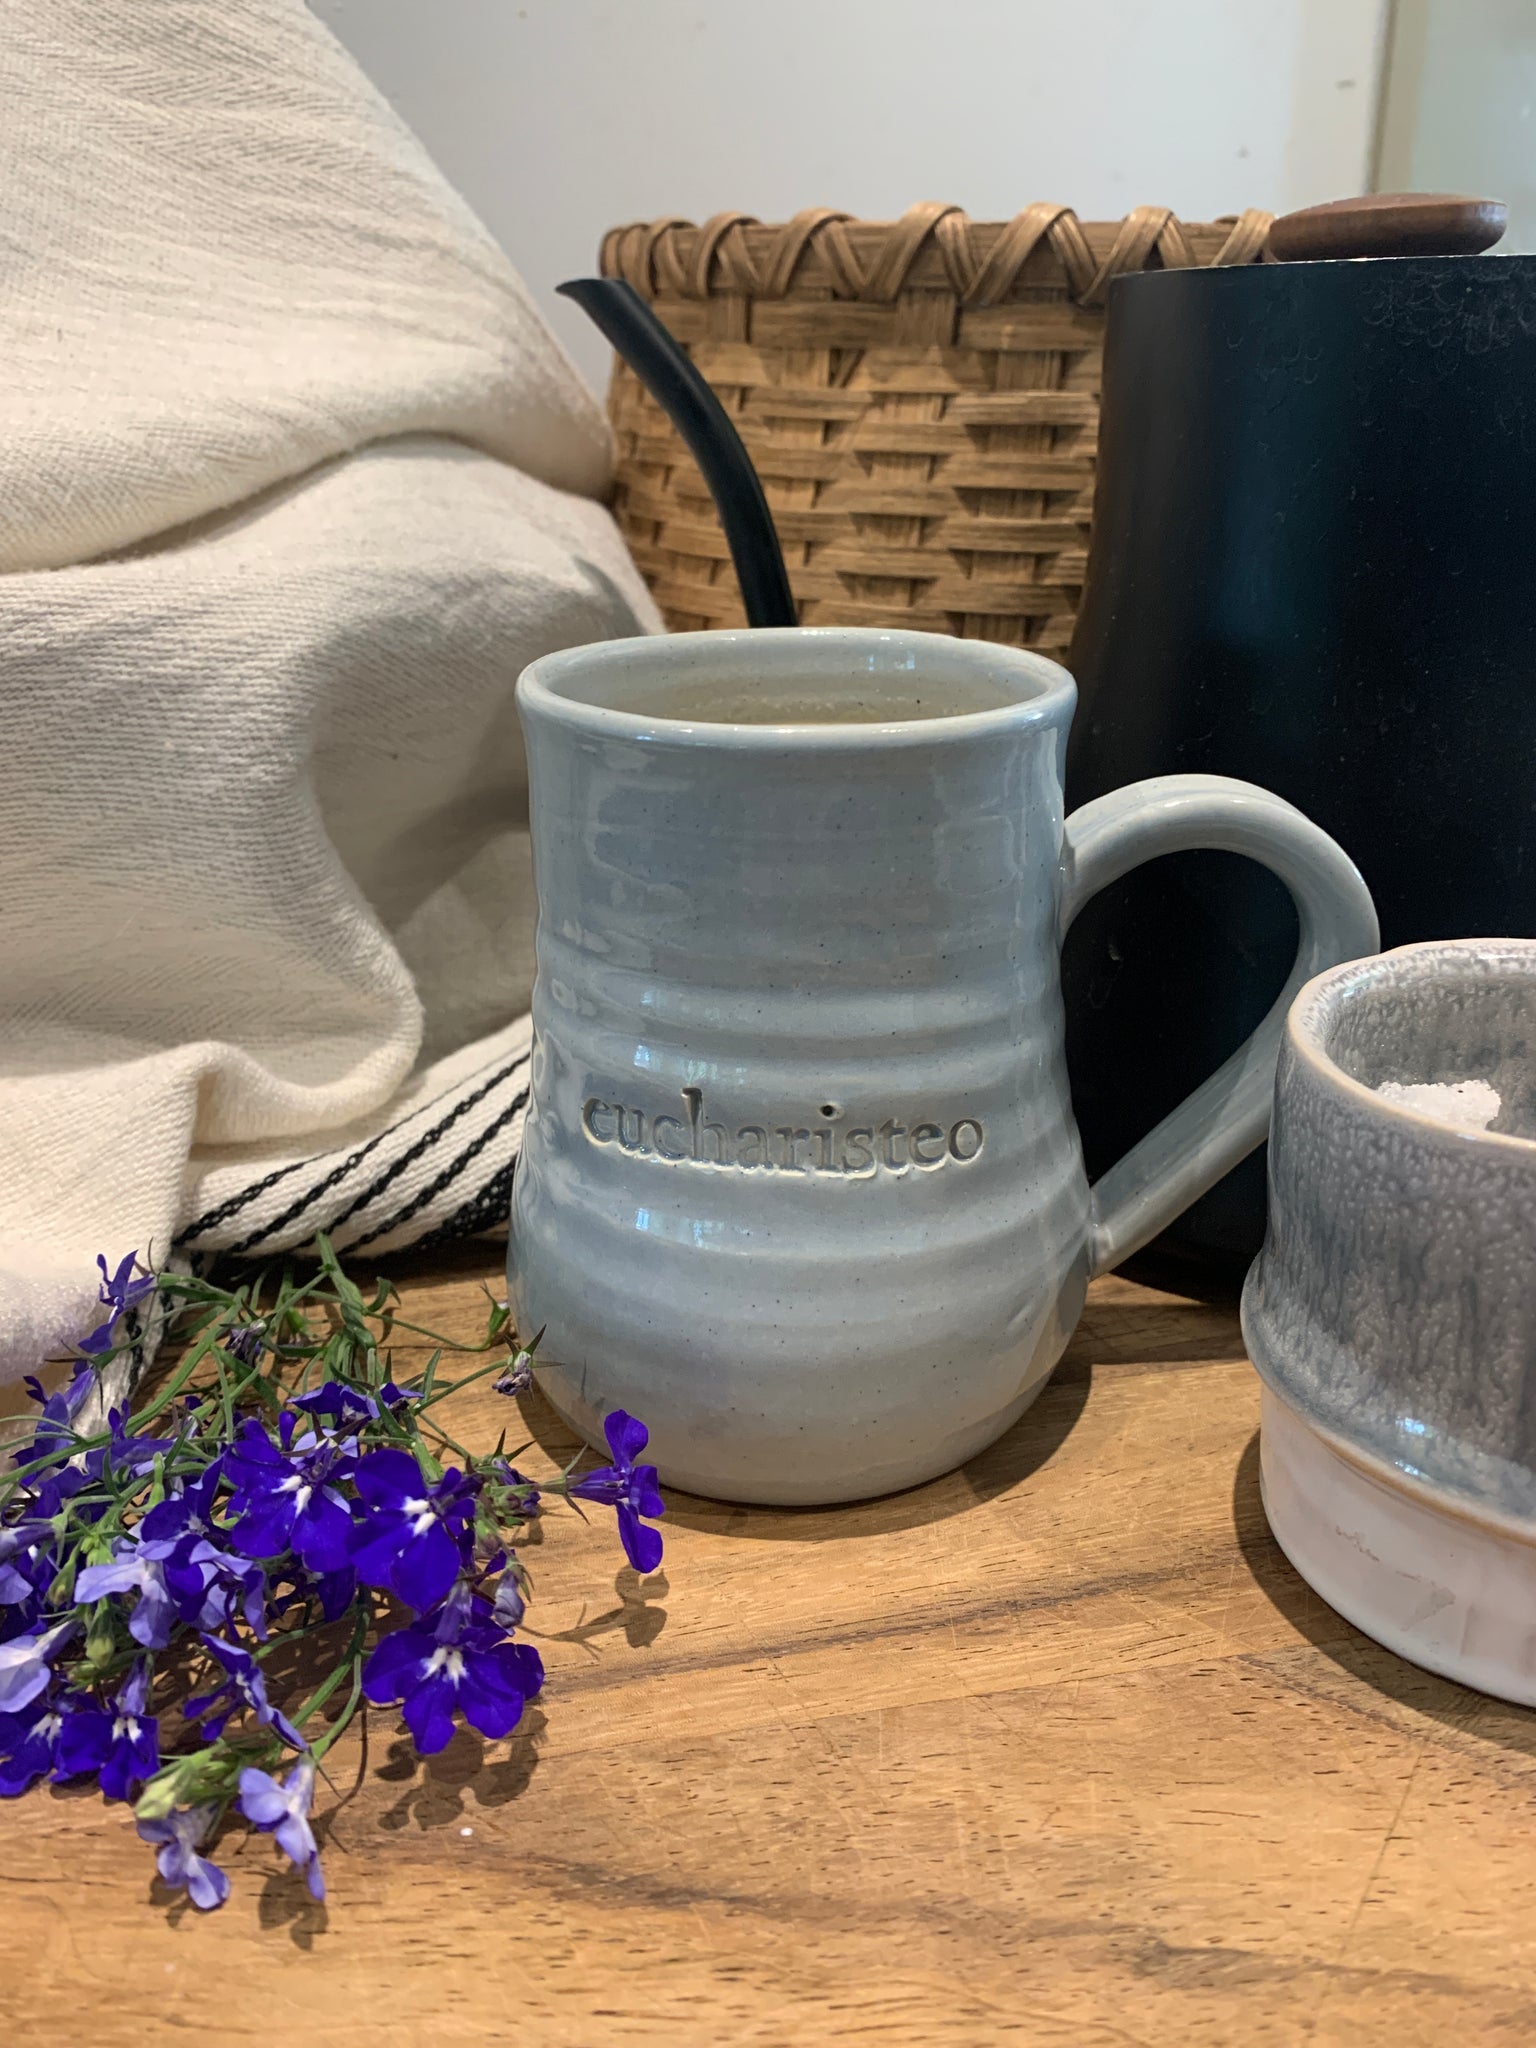 Three Gratitude Mugs with unique designs and glaze colors: "eucharisteo" with cloud blue glaze on white clay, "give thanks always" with darker blue glaze and ochre undertones, and "be still" with variegated gray glaze on red clay. Elegant shape, slight ripples, curved handles. Perfect for reflection and gifting.